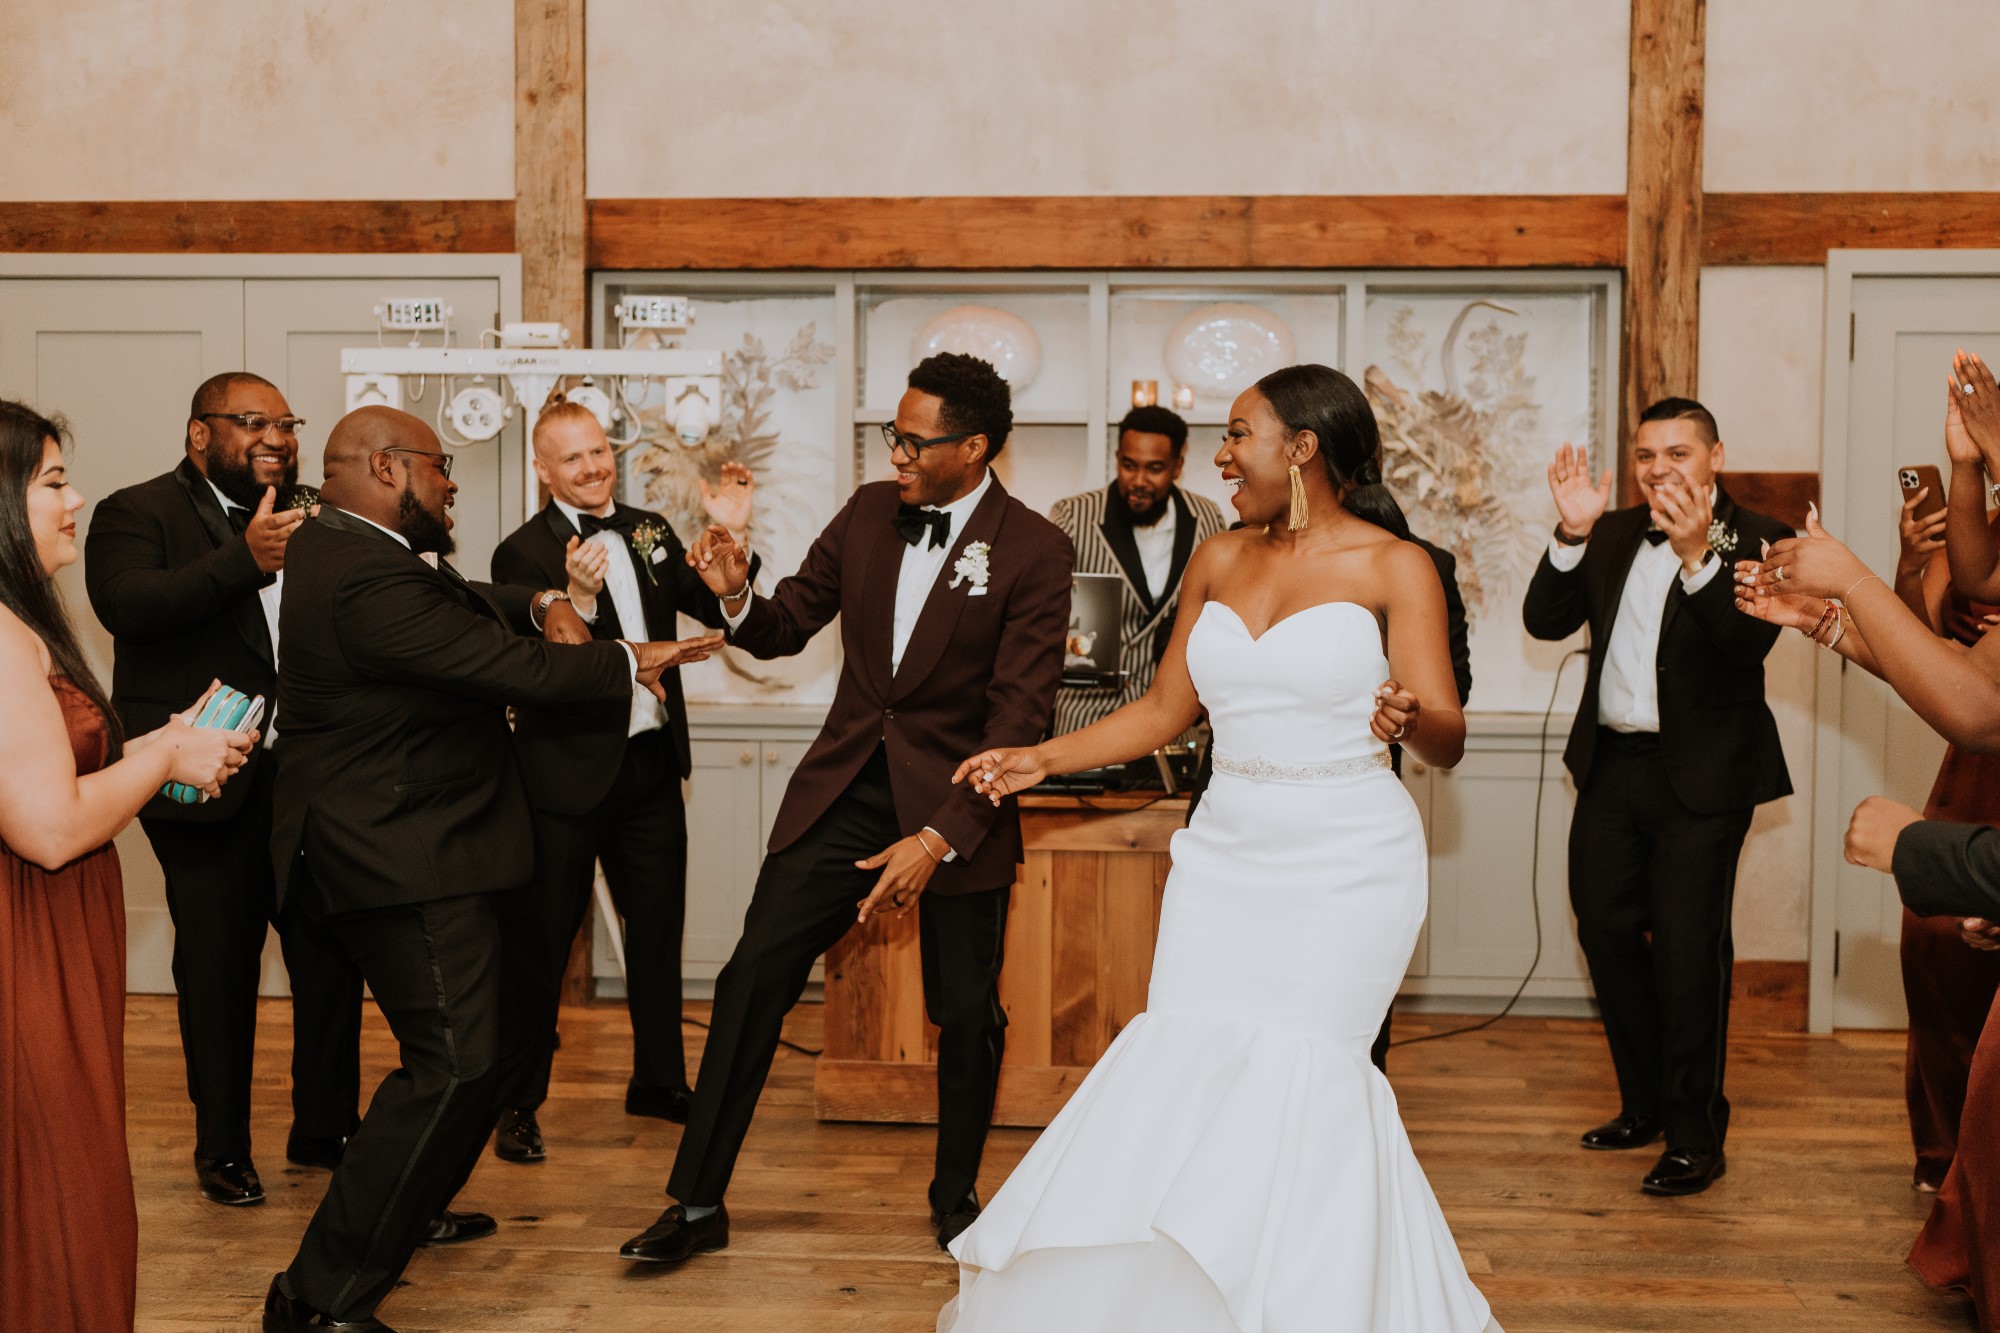 Bridal couple dancing at wedding reception with friends and family